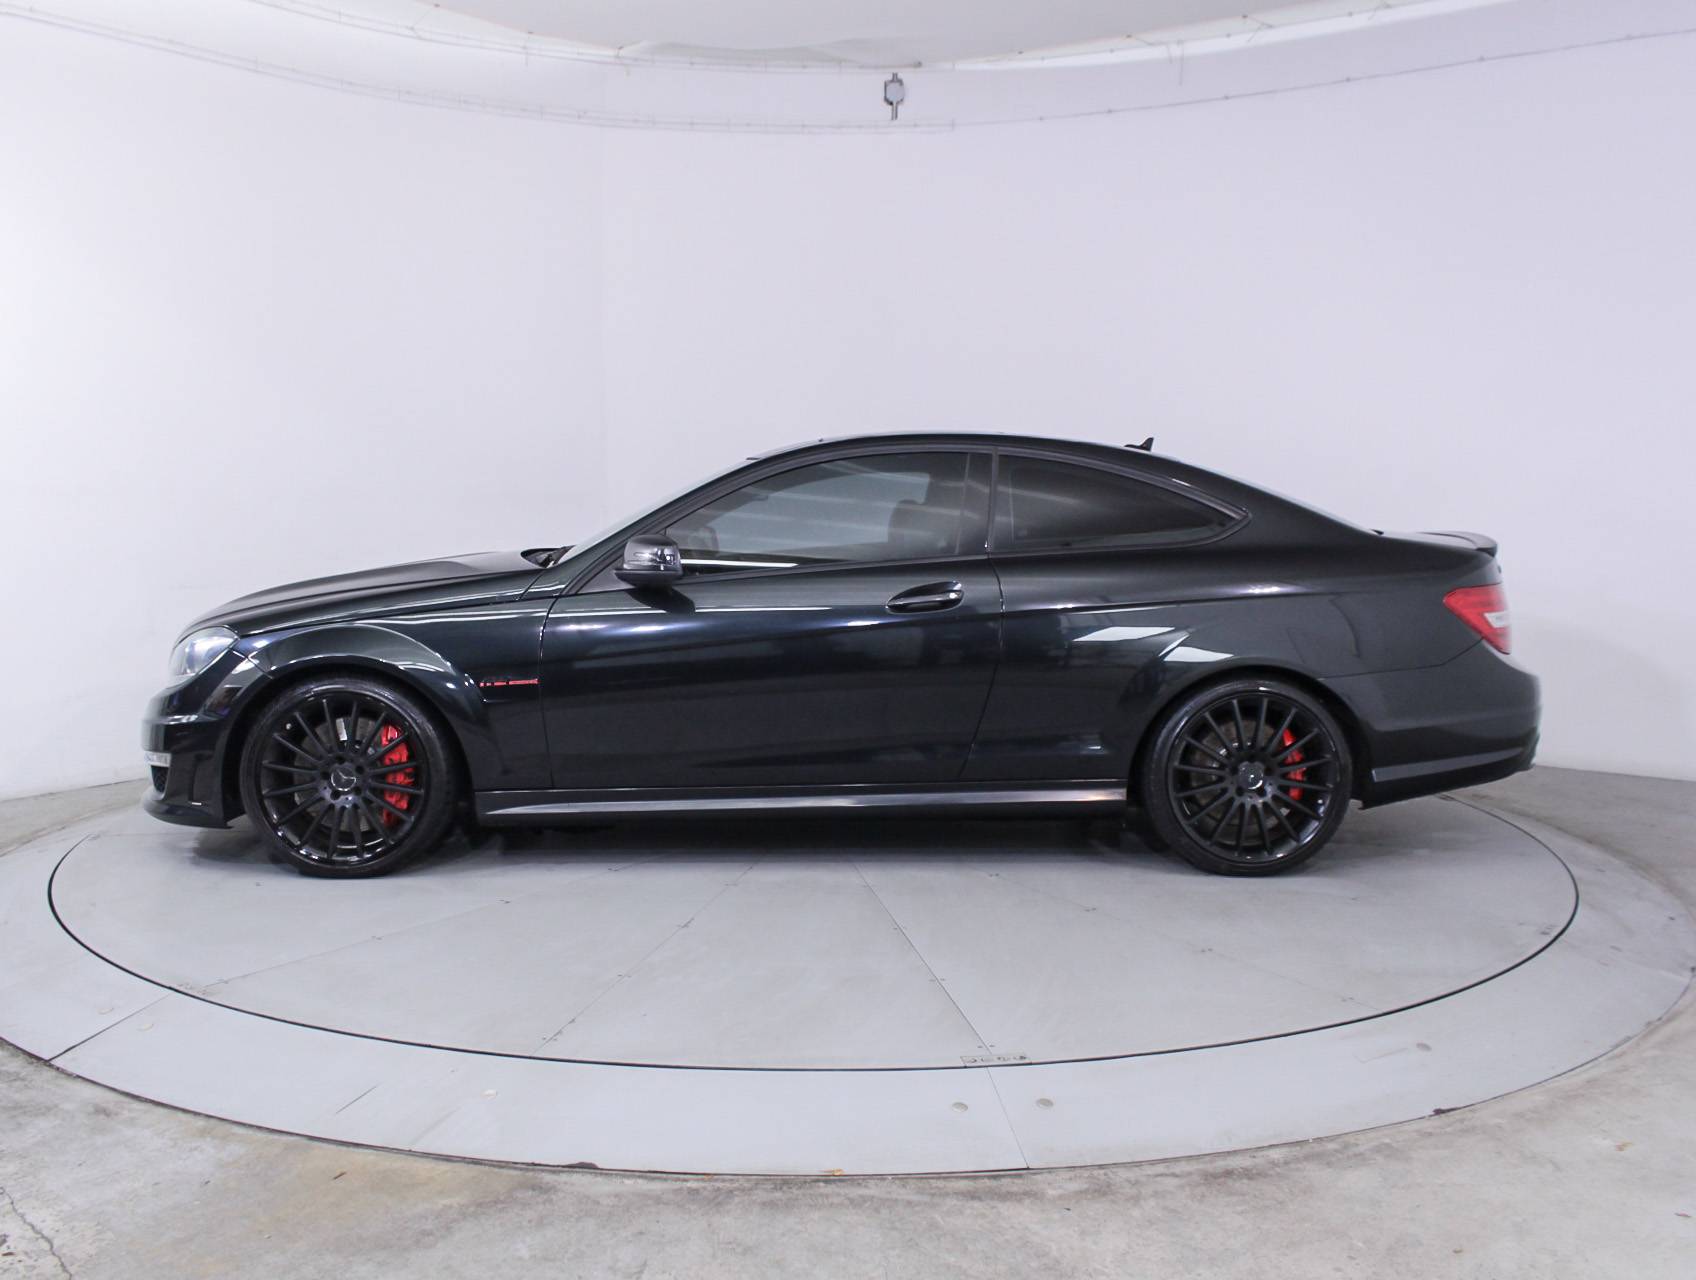 Used 2012 Mercedes Benz C Class C63 Amg Coupe For Sale In West Palm Fl 87284 Florida Fine Cars